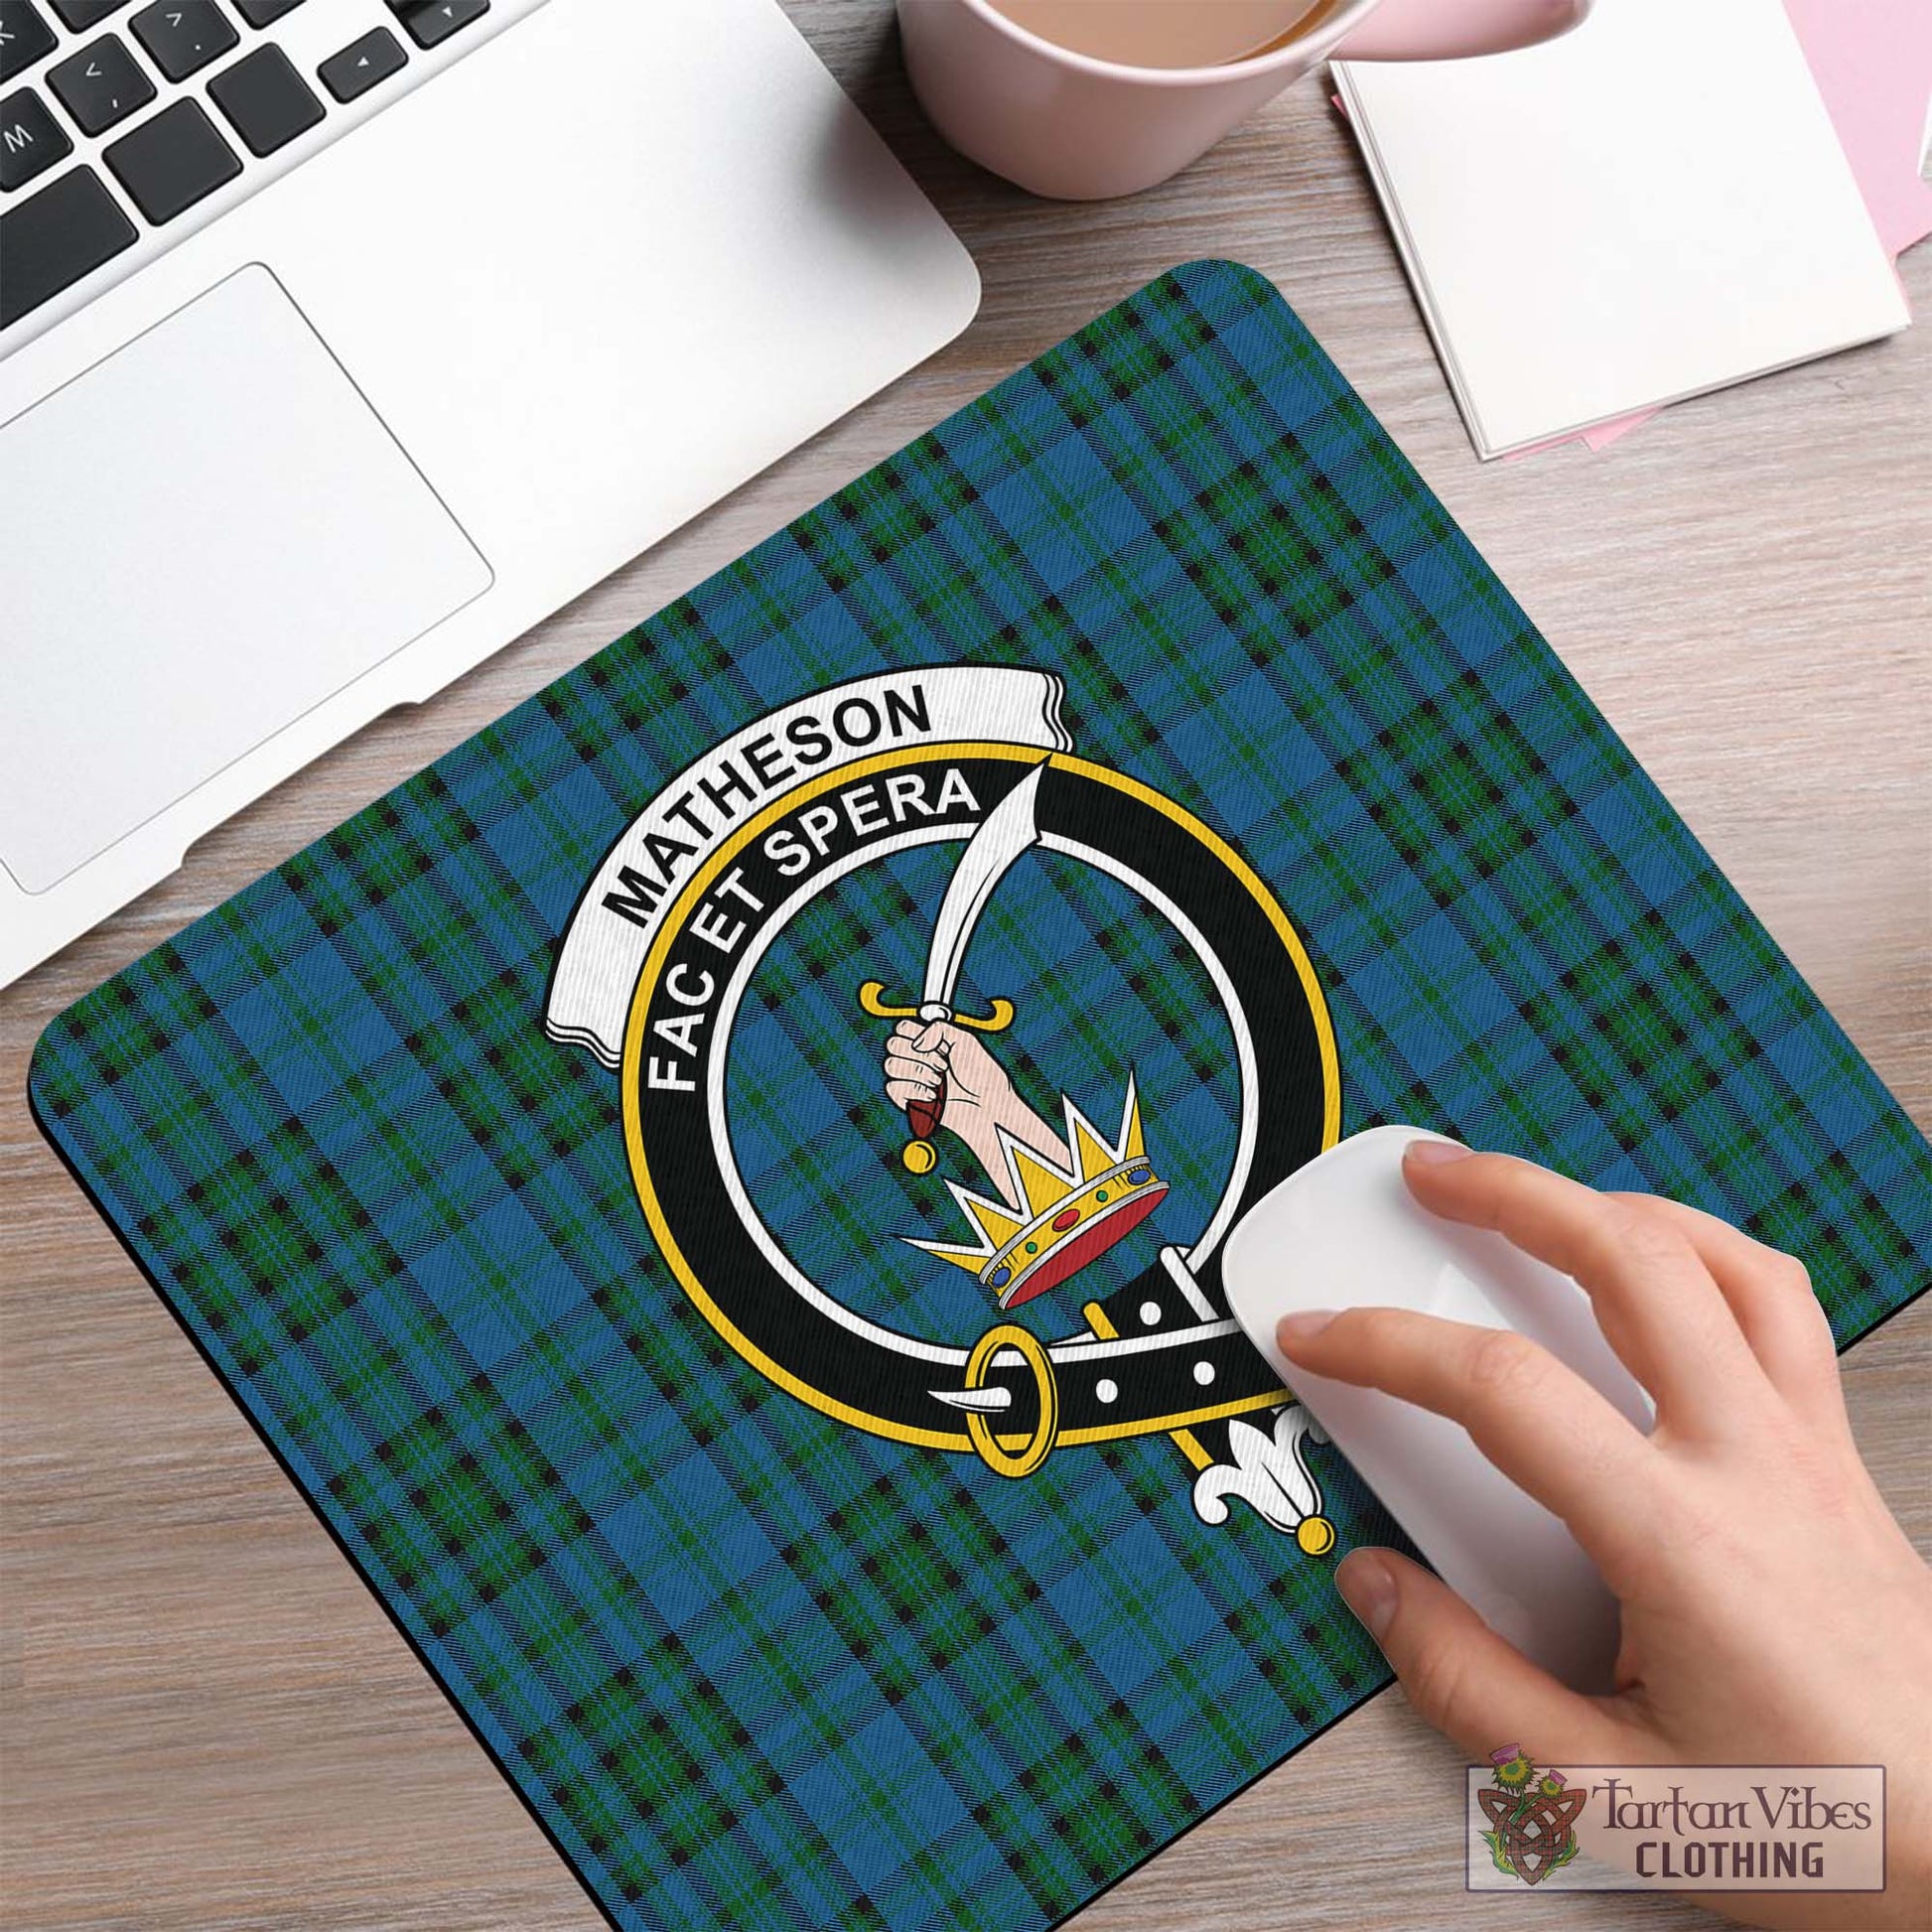 Tartan Vibes Clothing Matheson Hunting Tartan Mouse Pad with Family Crest